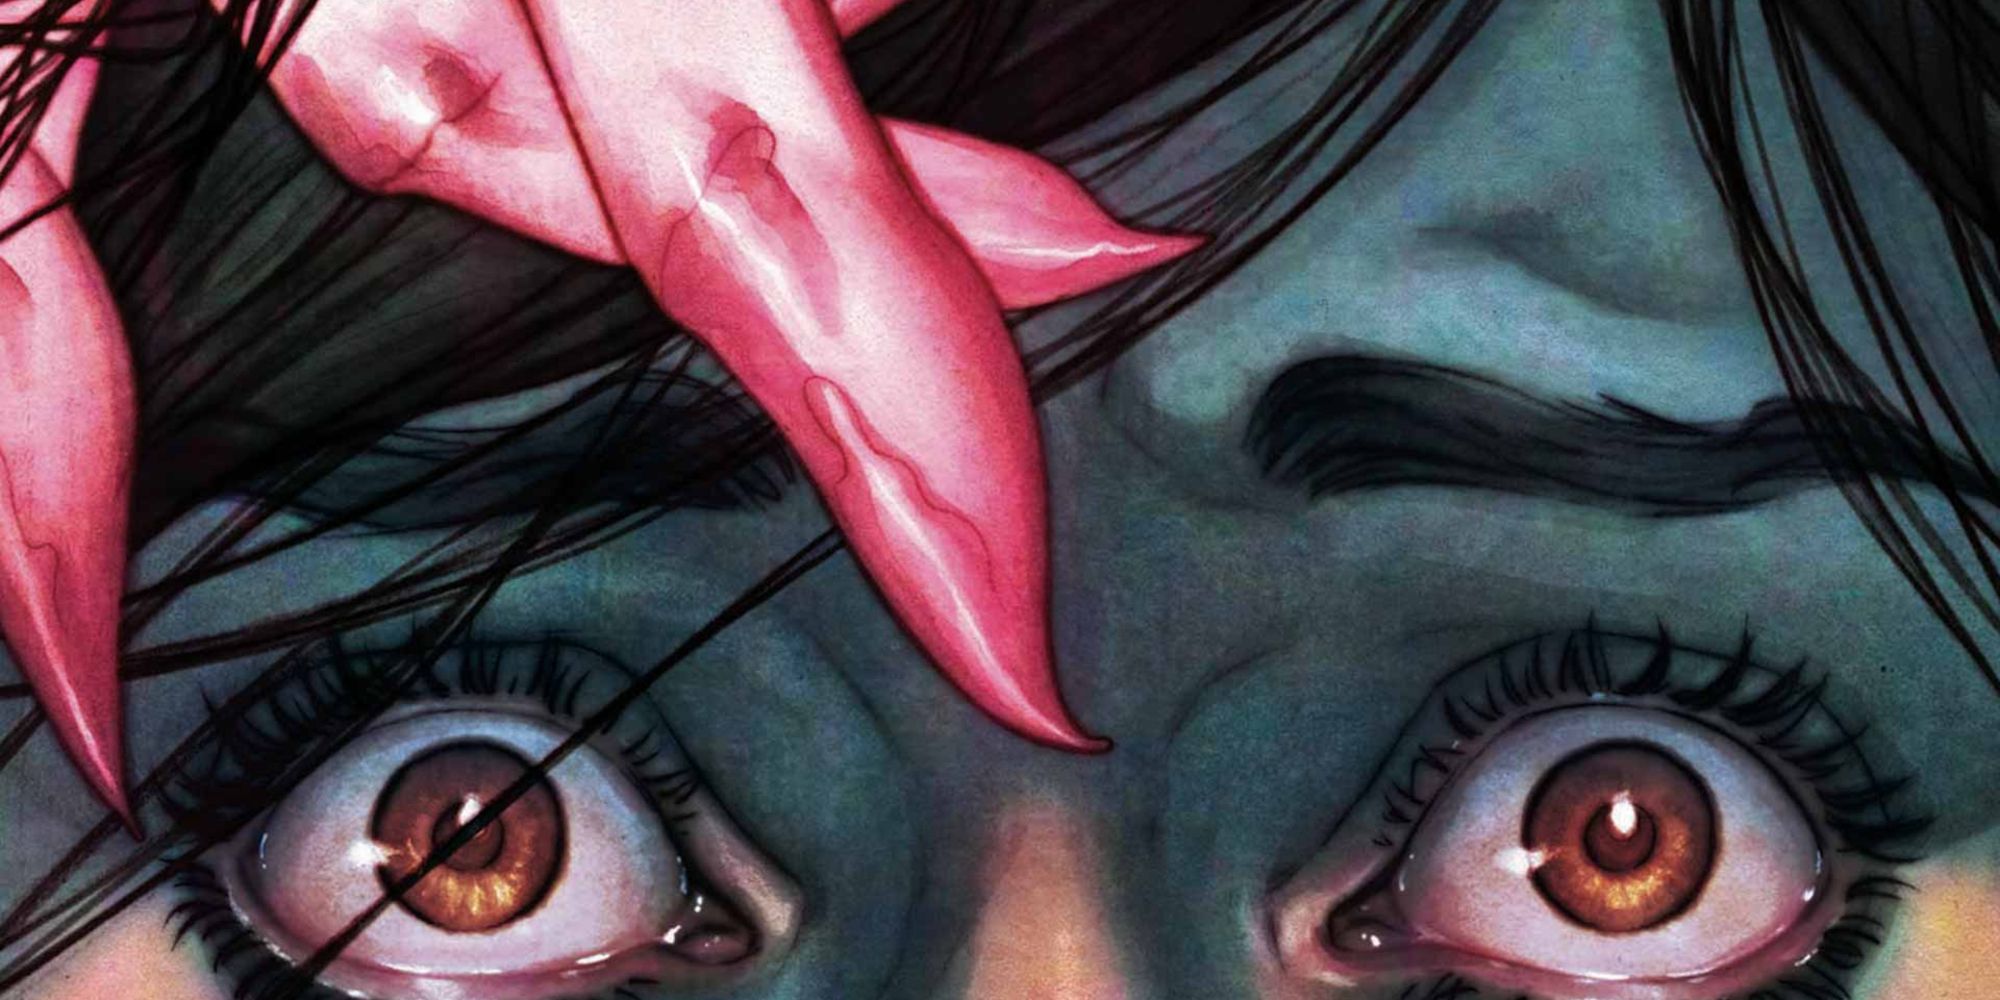 Clean Room 1 Cover Art Jenny Frison